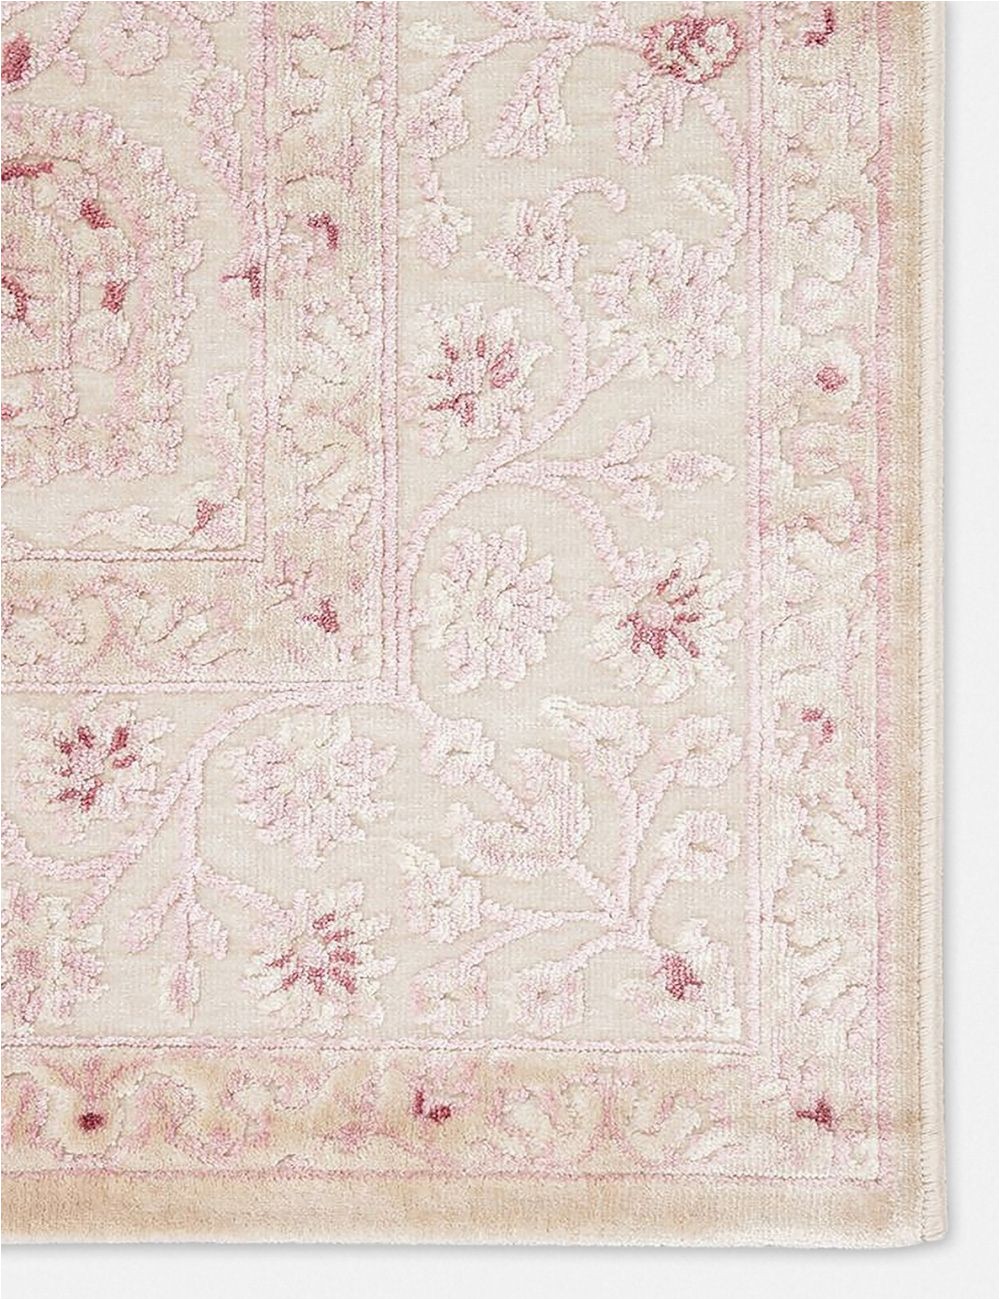 Pink and Cream area Rug Enzo Rug In 2020